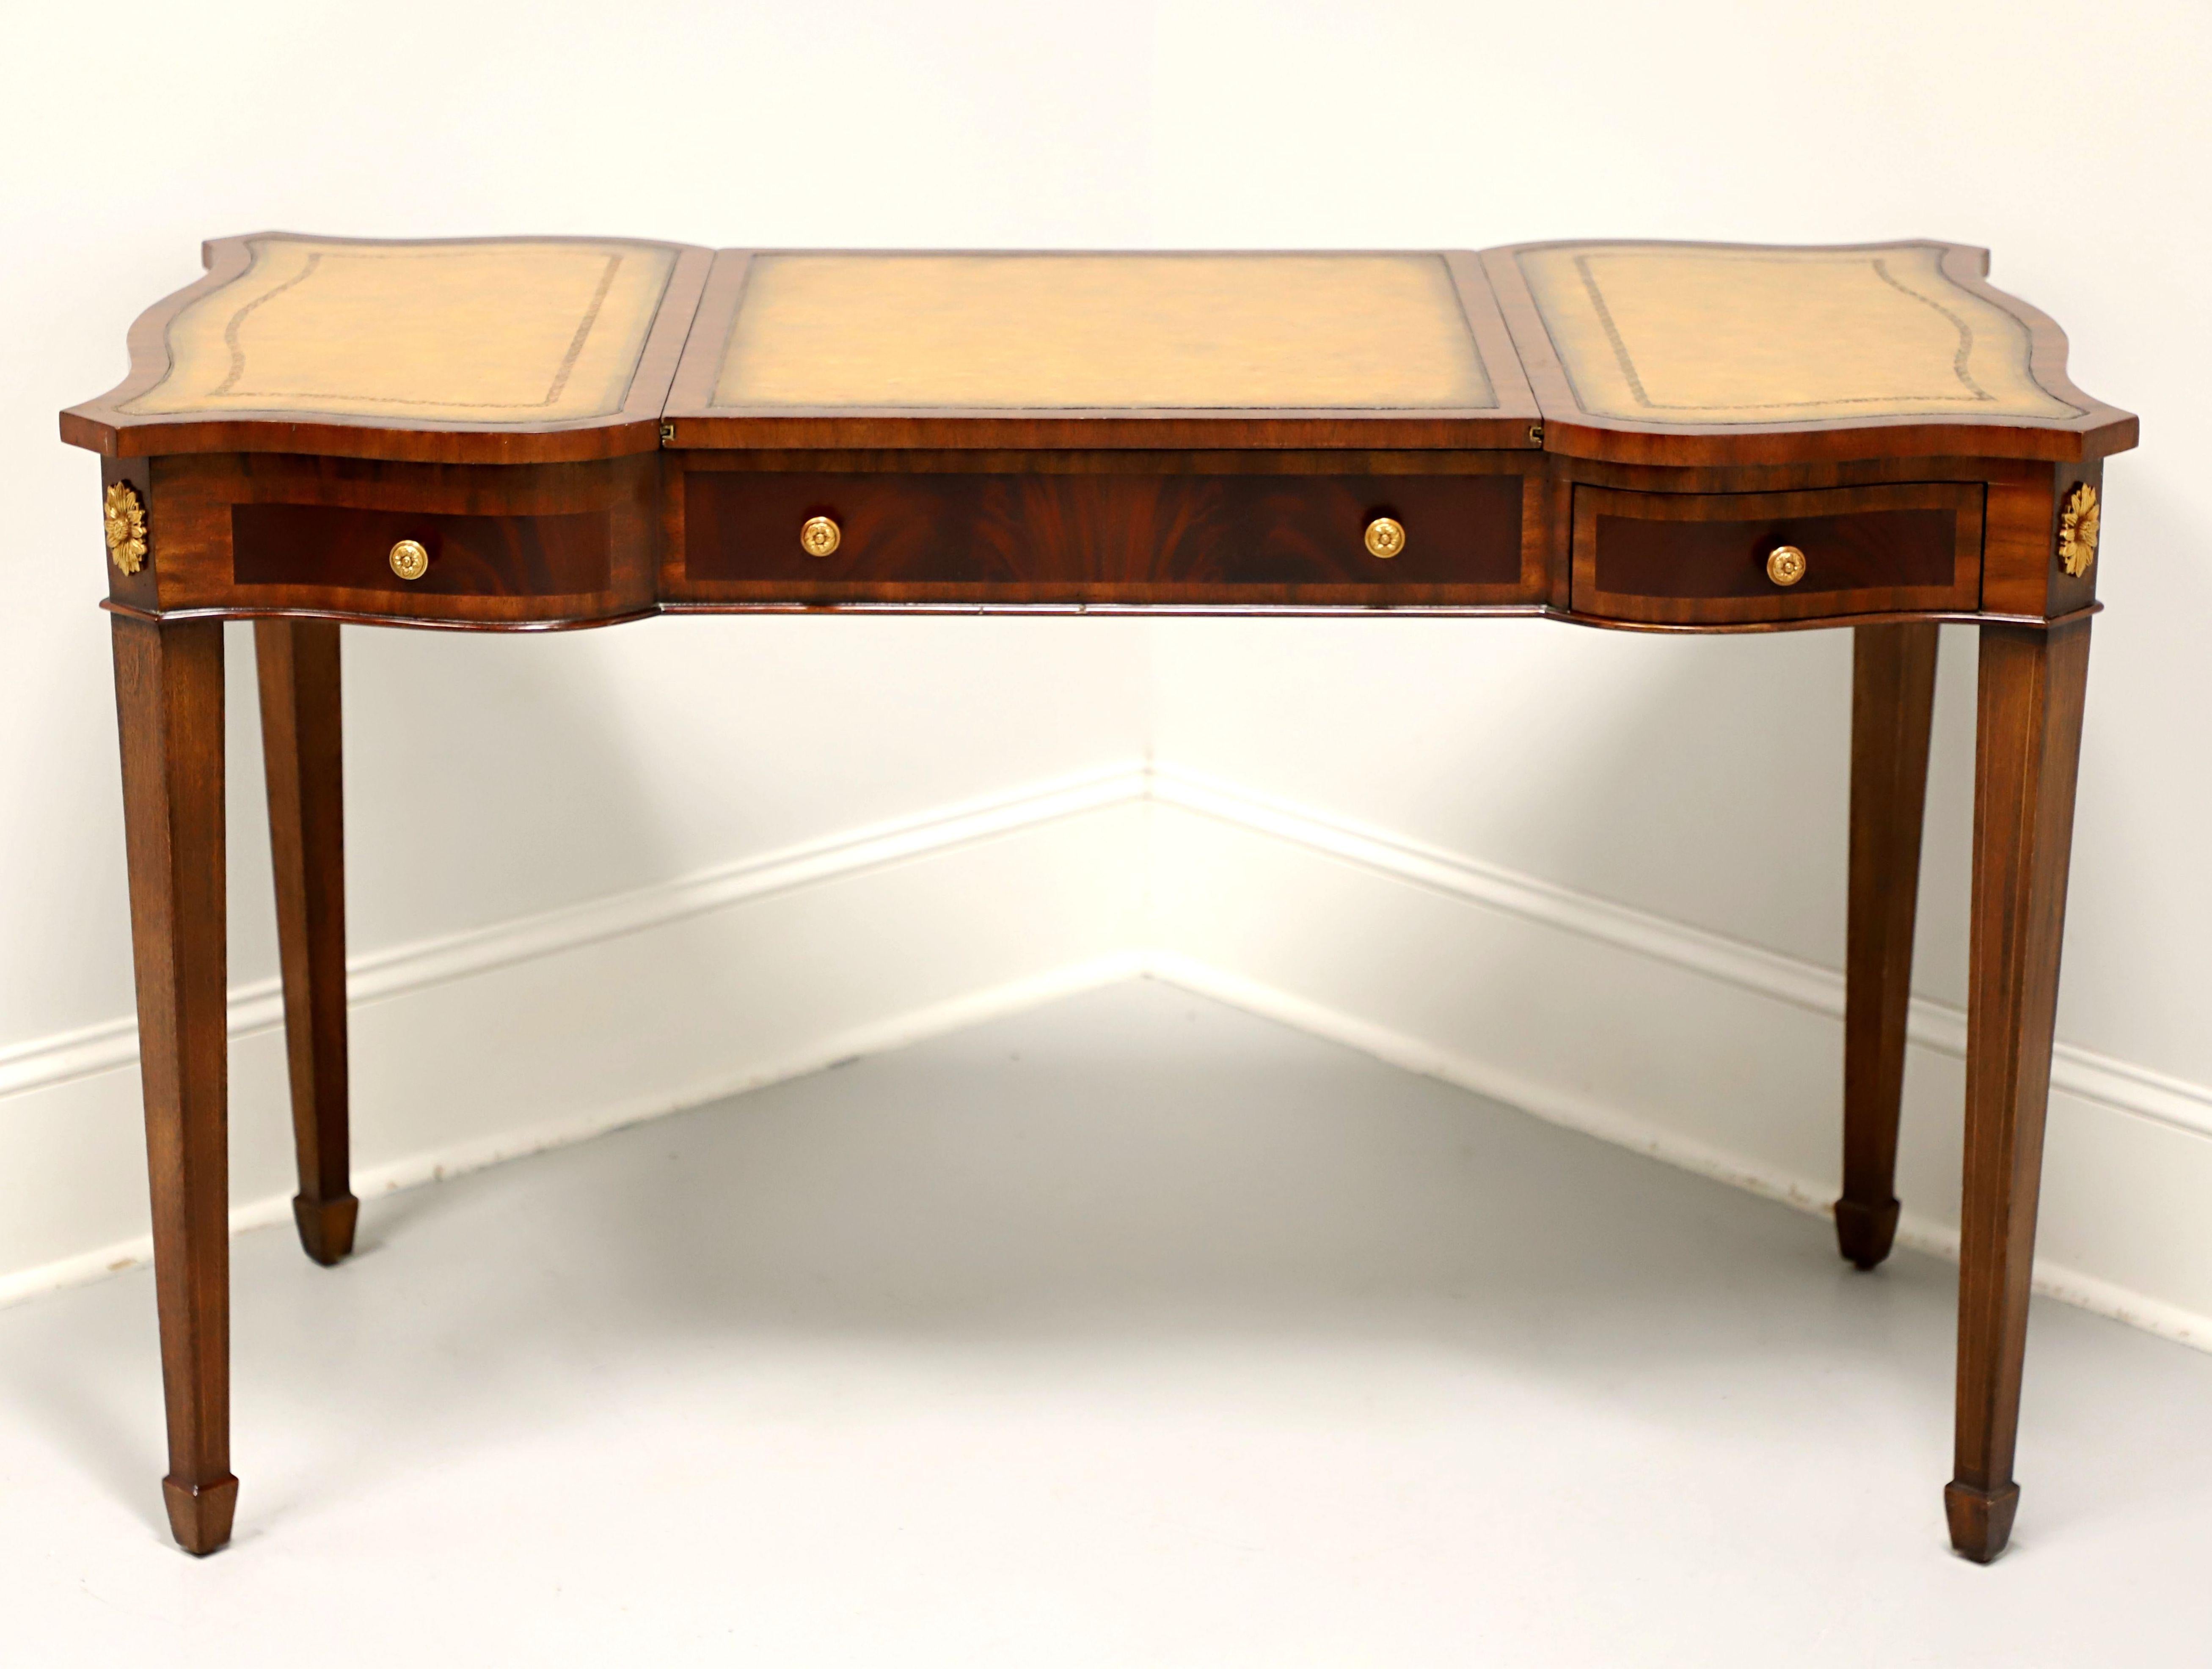 A Regency style writing desk / game table by Maitland Smith. Mahogany with banded drawer fronts, tooled & embossed leather top, reversible & removable top center section, slide-out side trays that extend leather desk top surface, brass hardware &